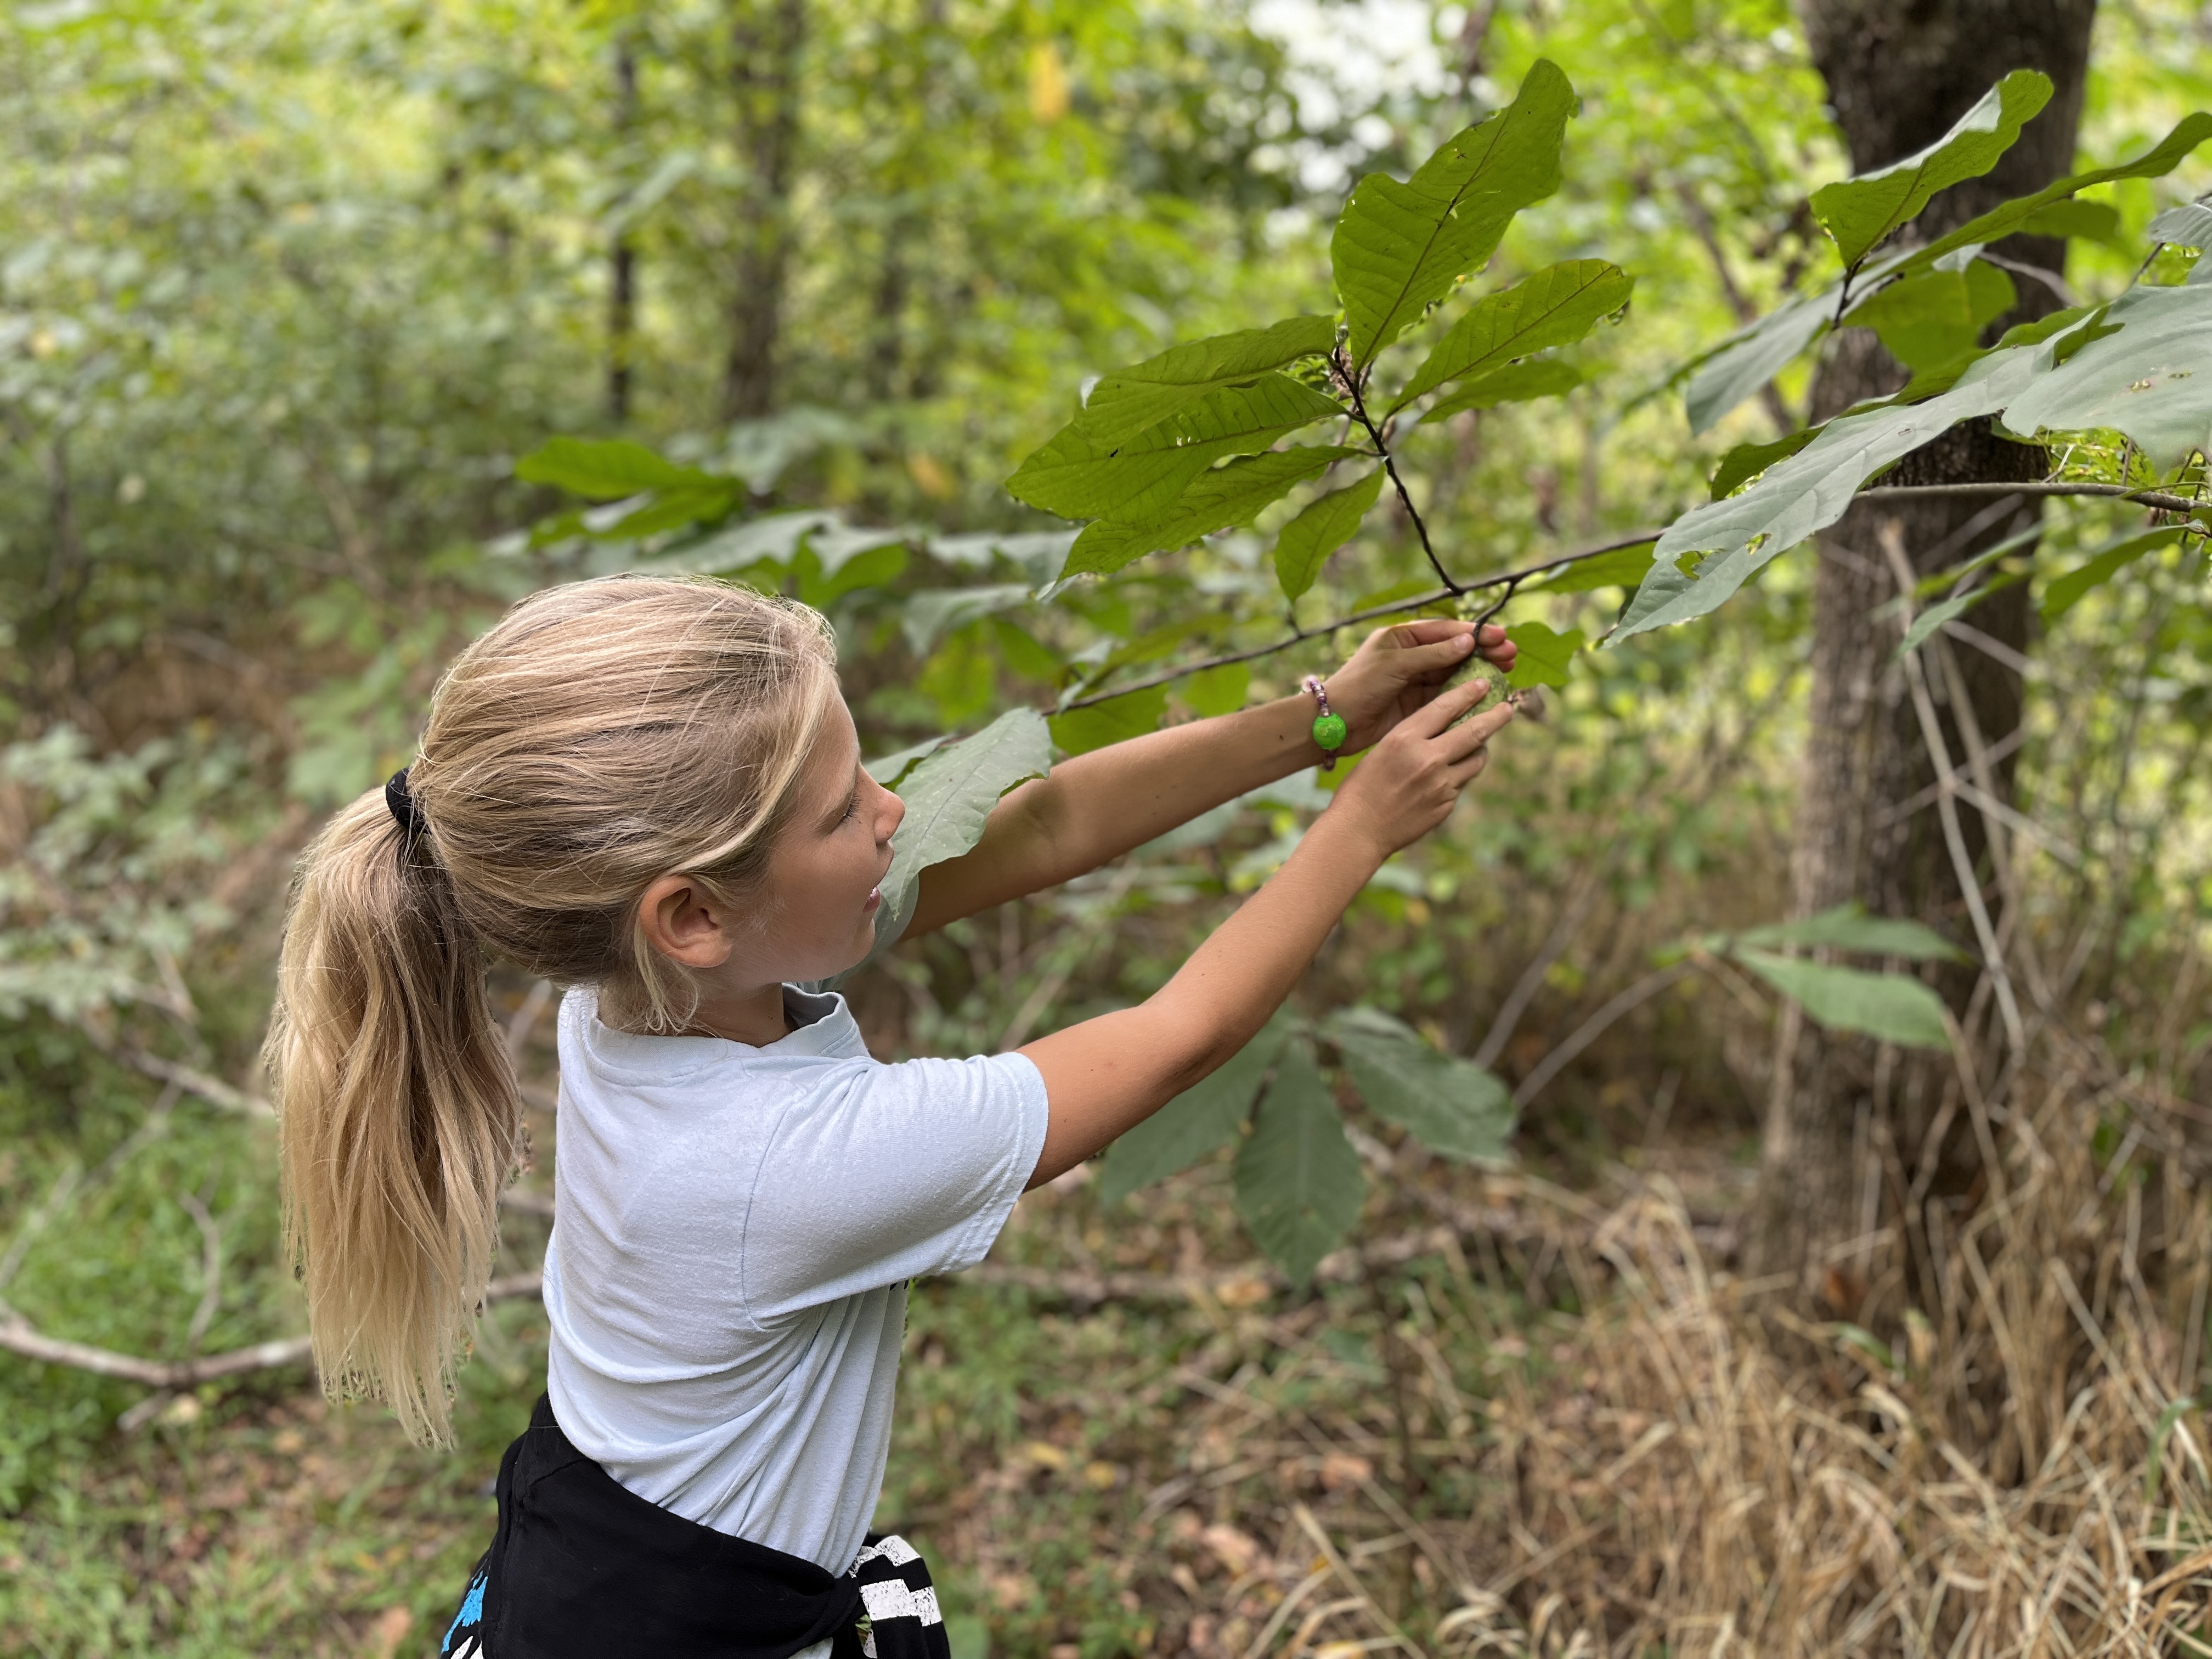 a young girl picks ripe pawpaws from a tree